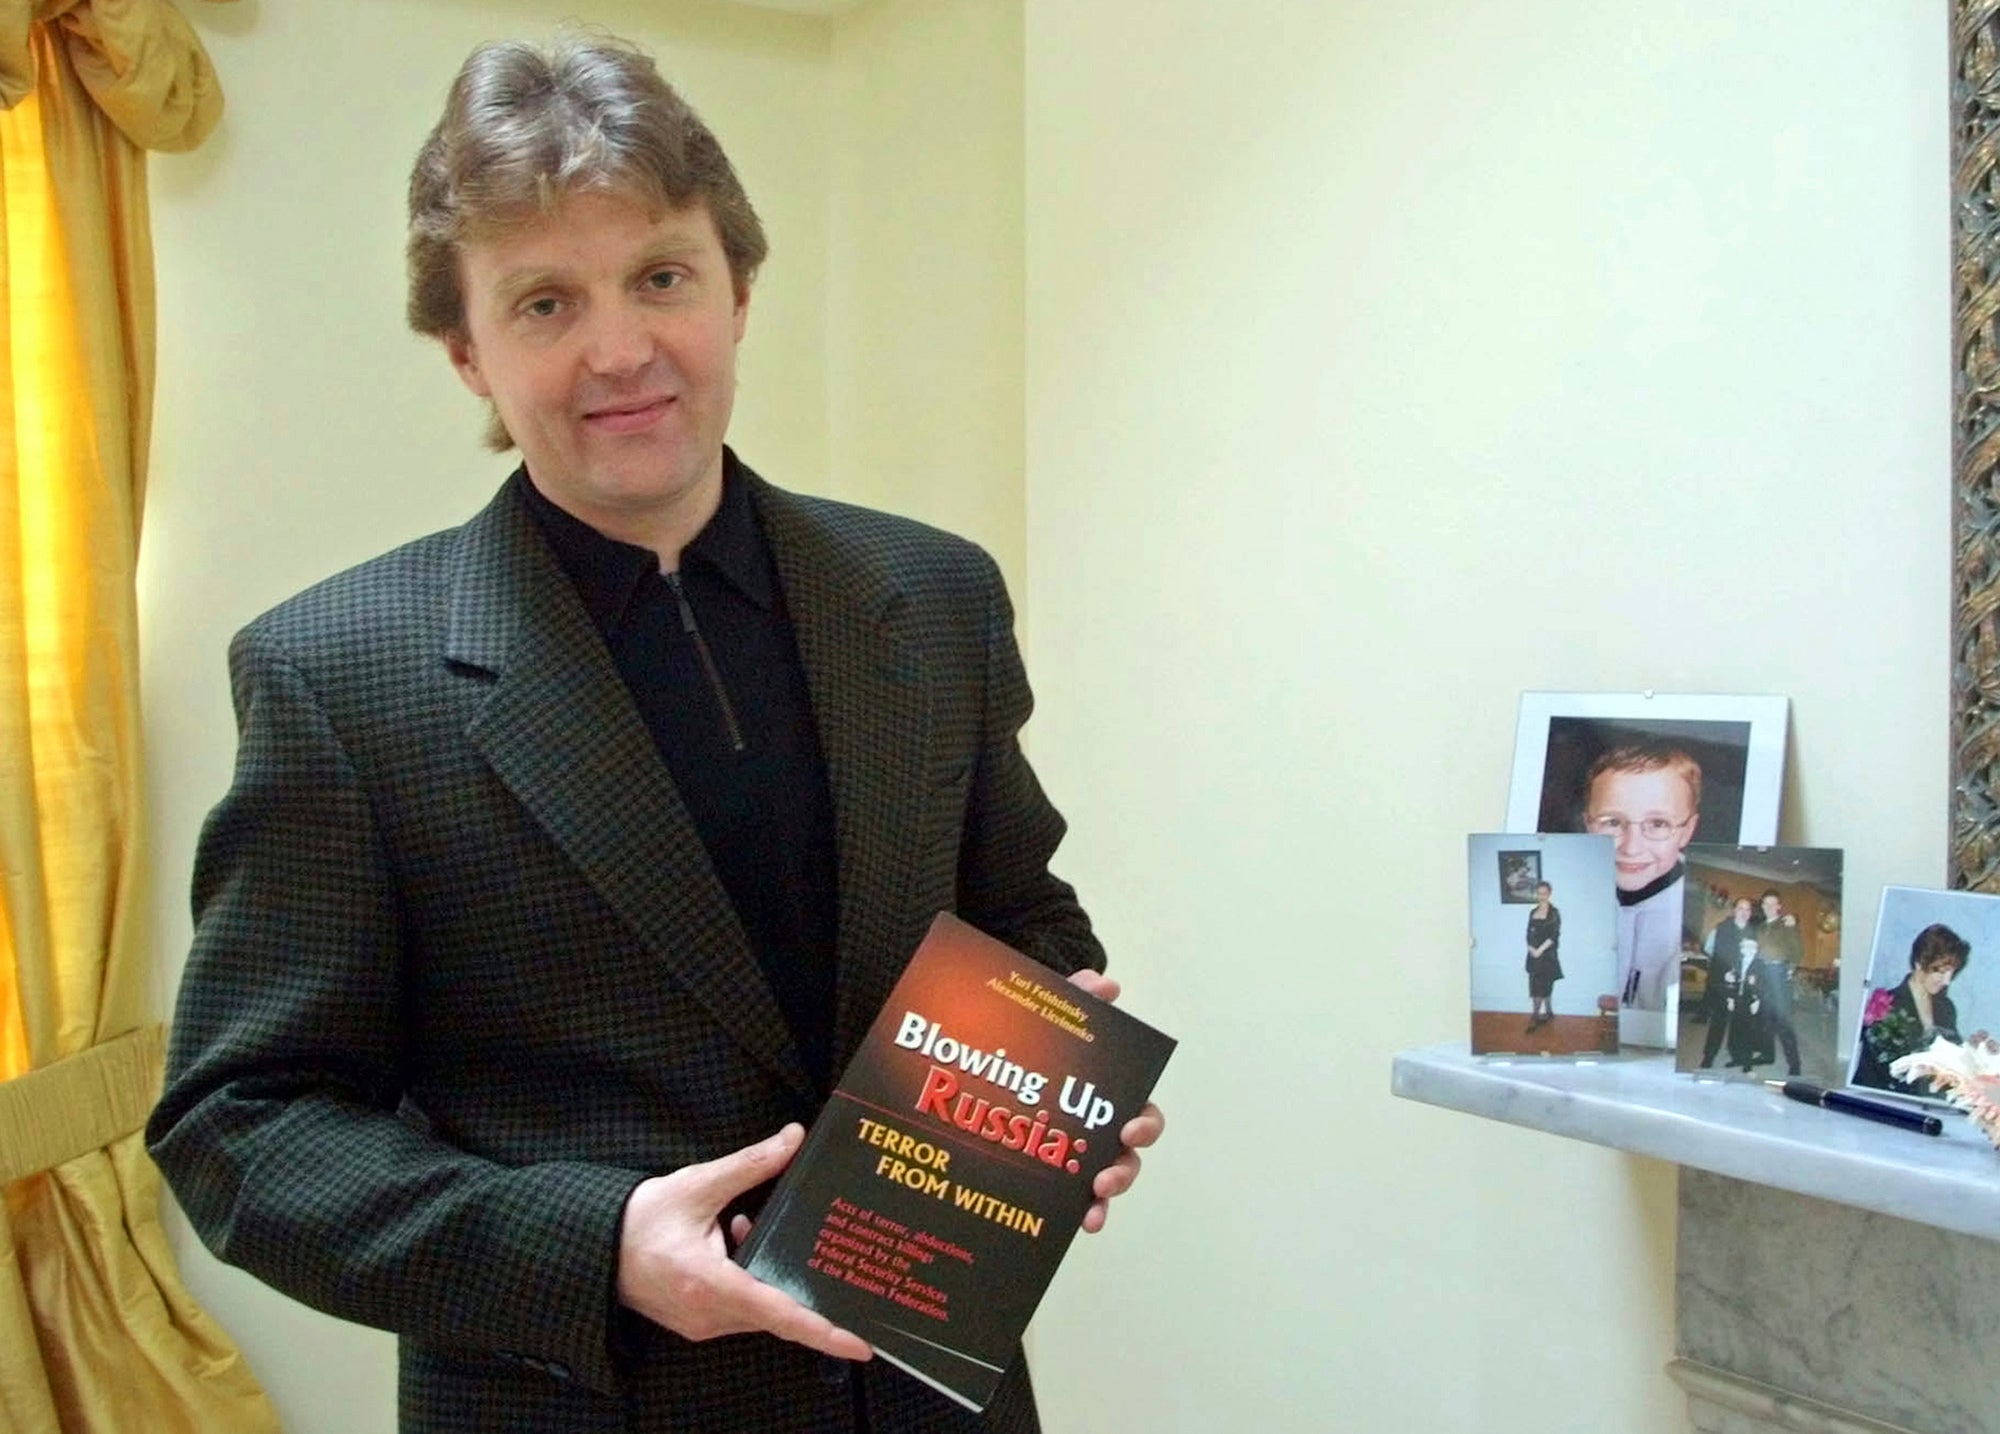 Alexander Litvinenko, a prominent Putin critic, died in 2006 after becoming violently ill in London having drunk tea laced with radioactive polonium-210